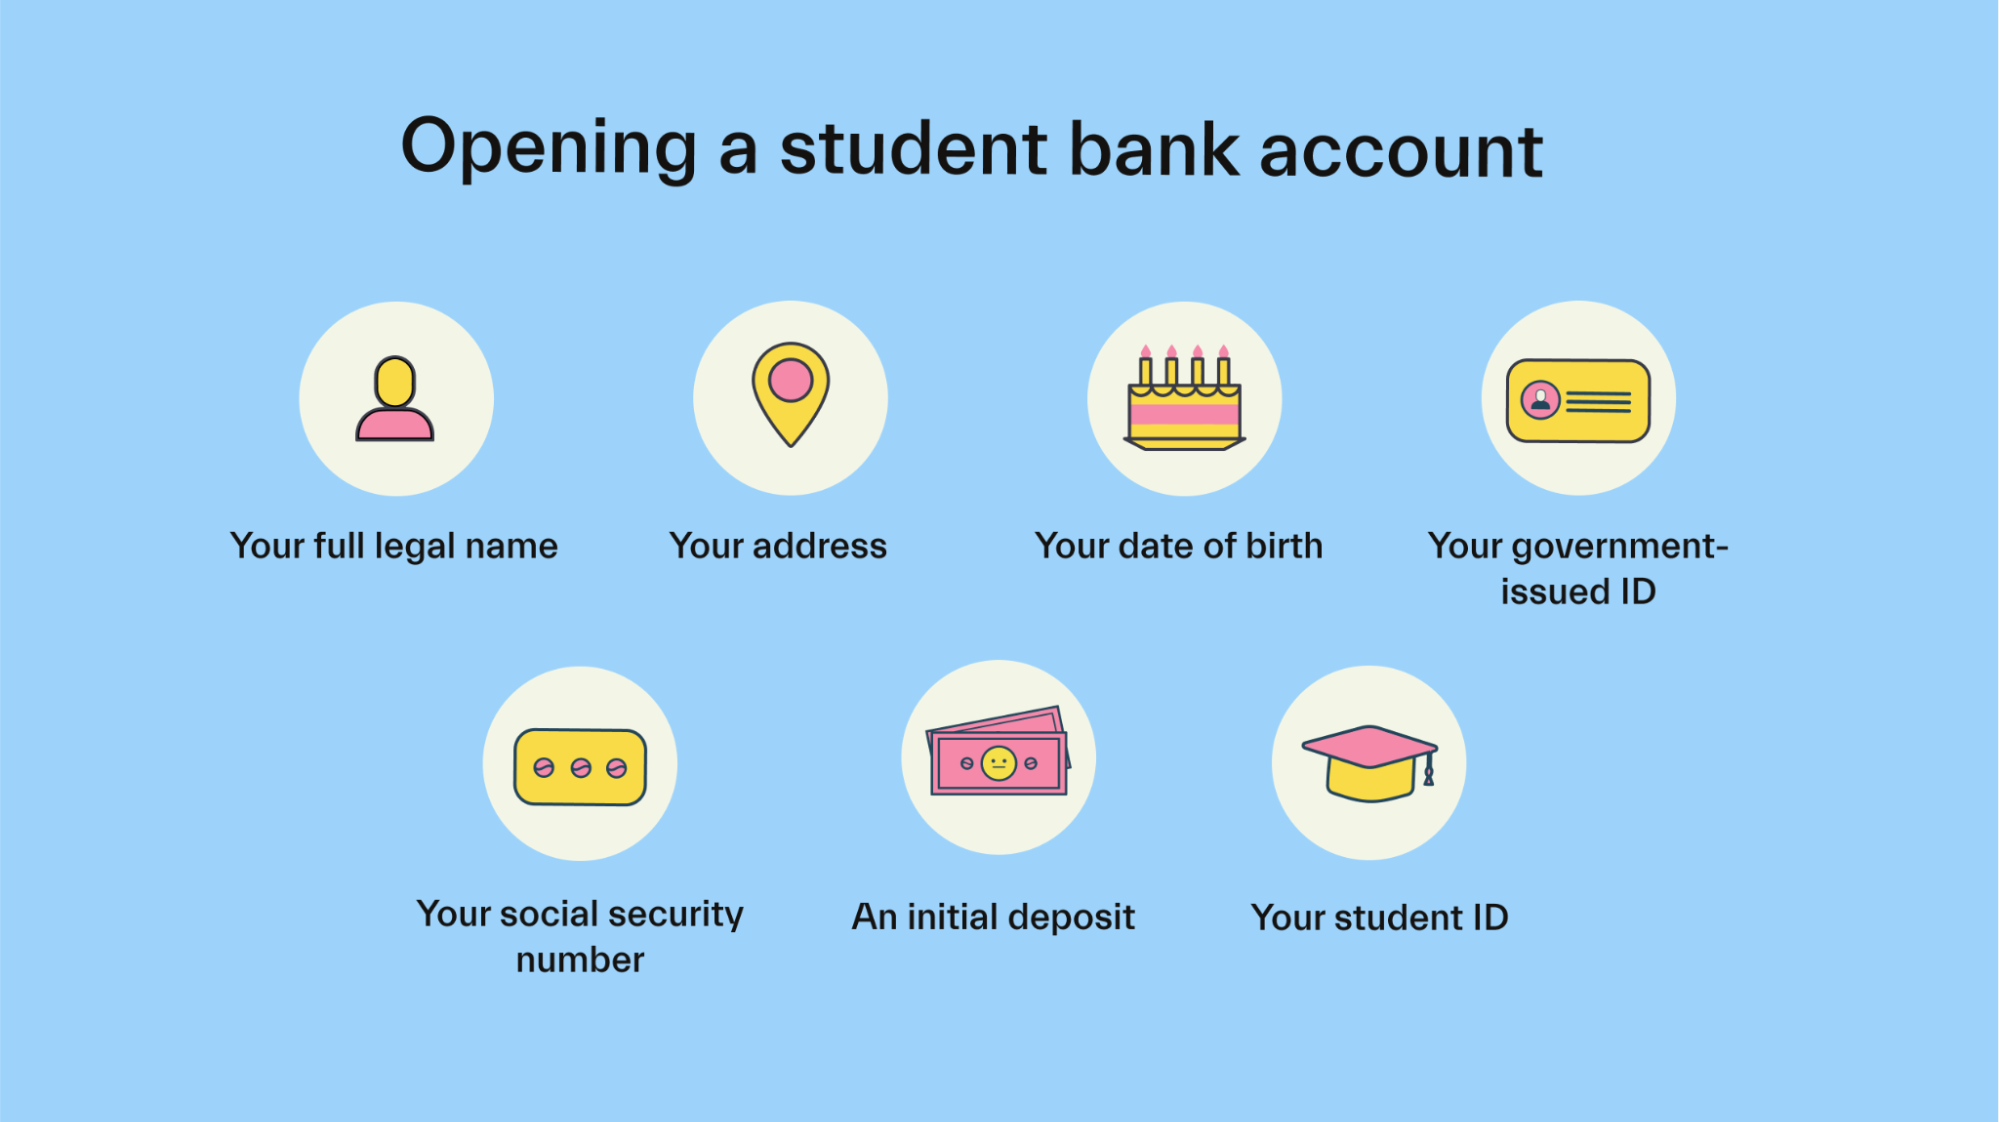 Opening a student bank account